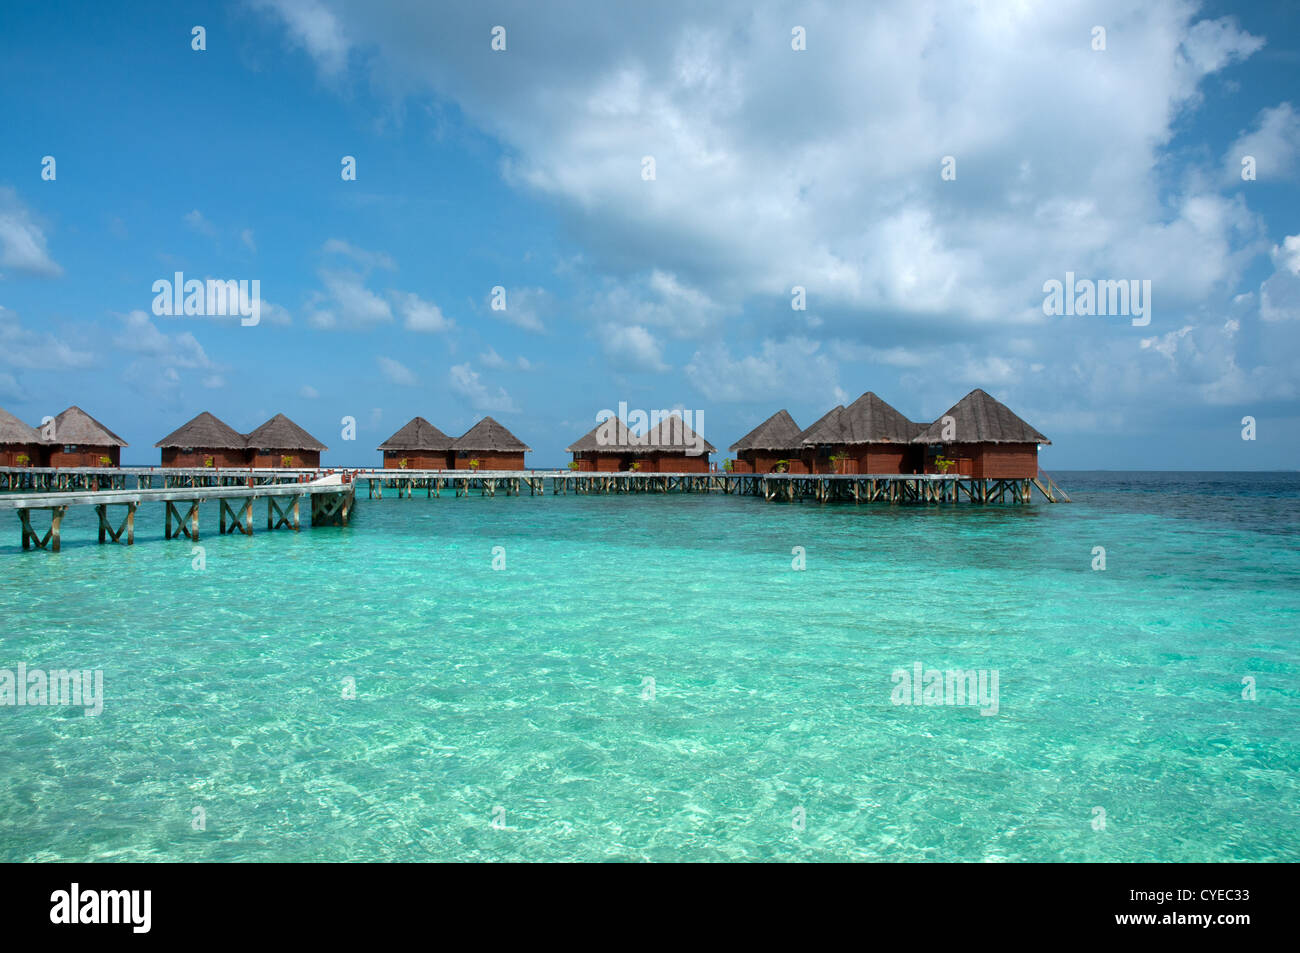 Overwater bungalows in beautiful blue lagoon, Maldives Stock Photo